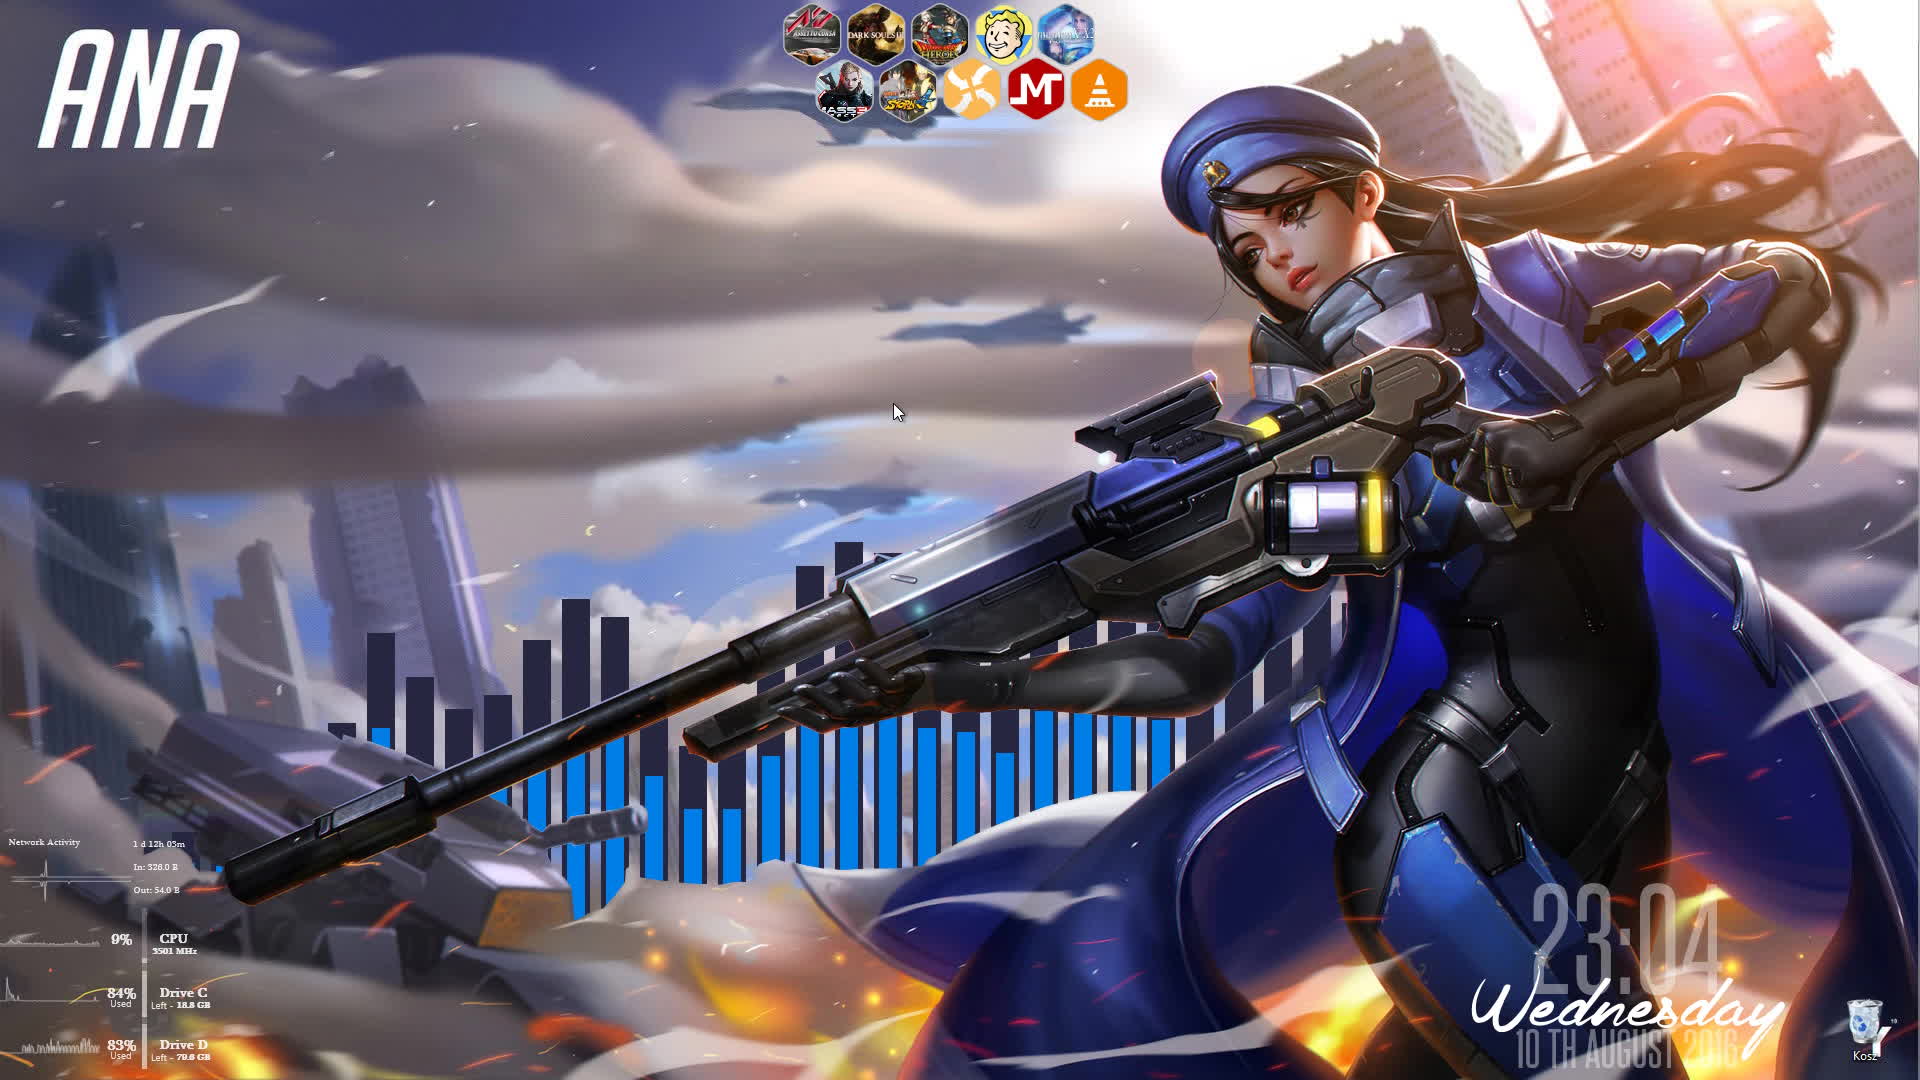 Ana Overwatch Wallpaper HD Book Your